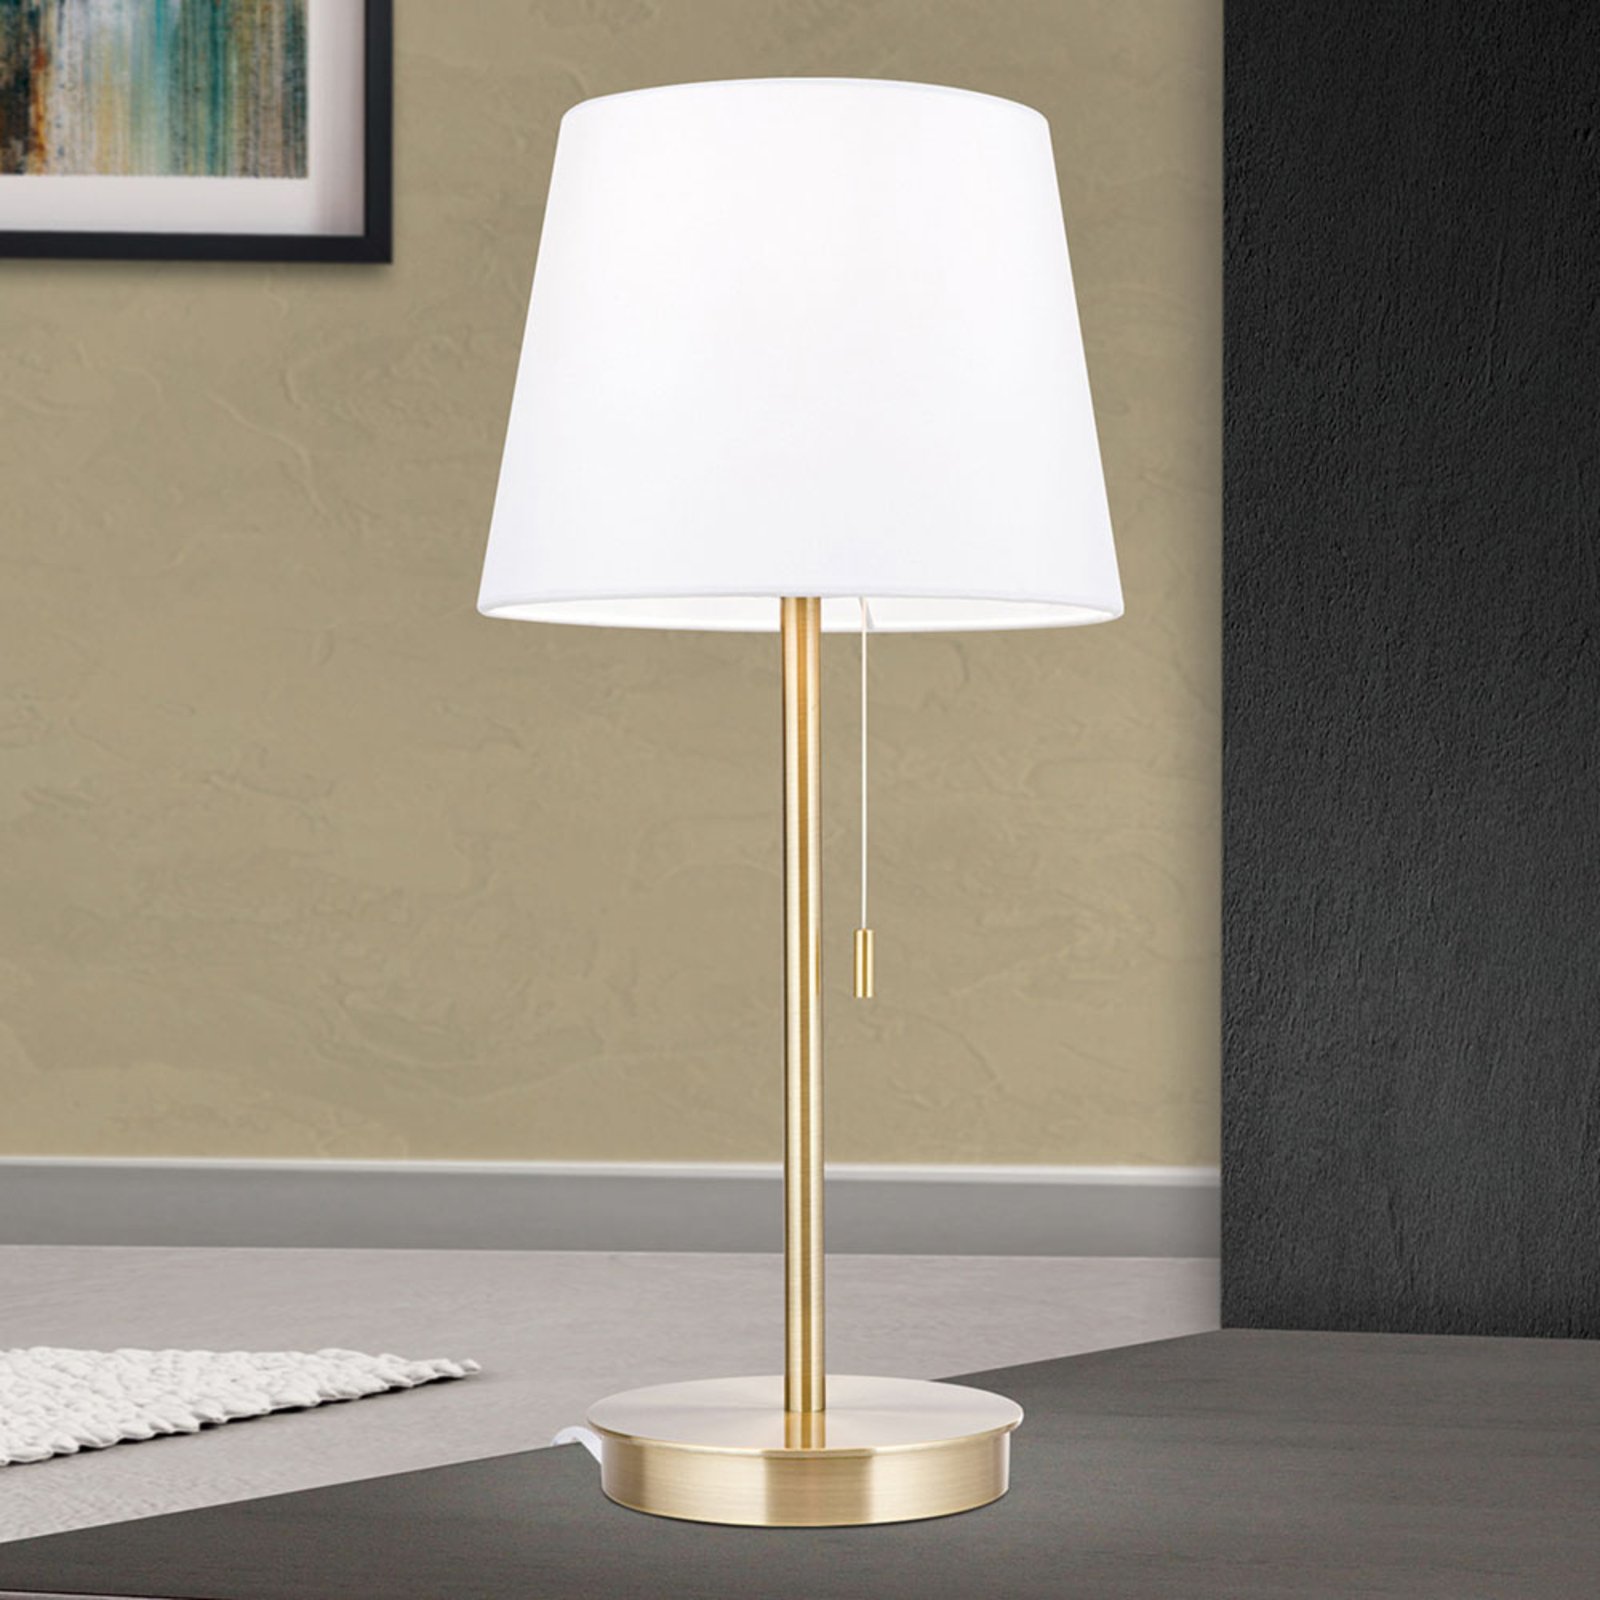 Ludwig table lamp, USB port white/antique brass